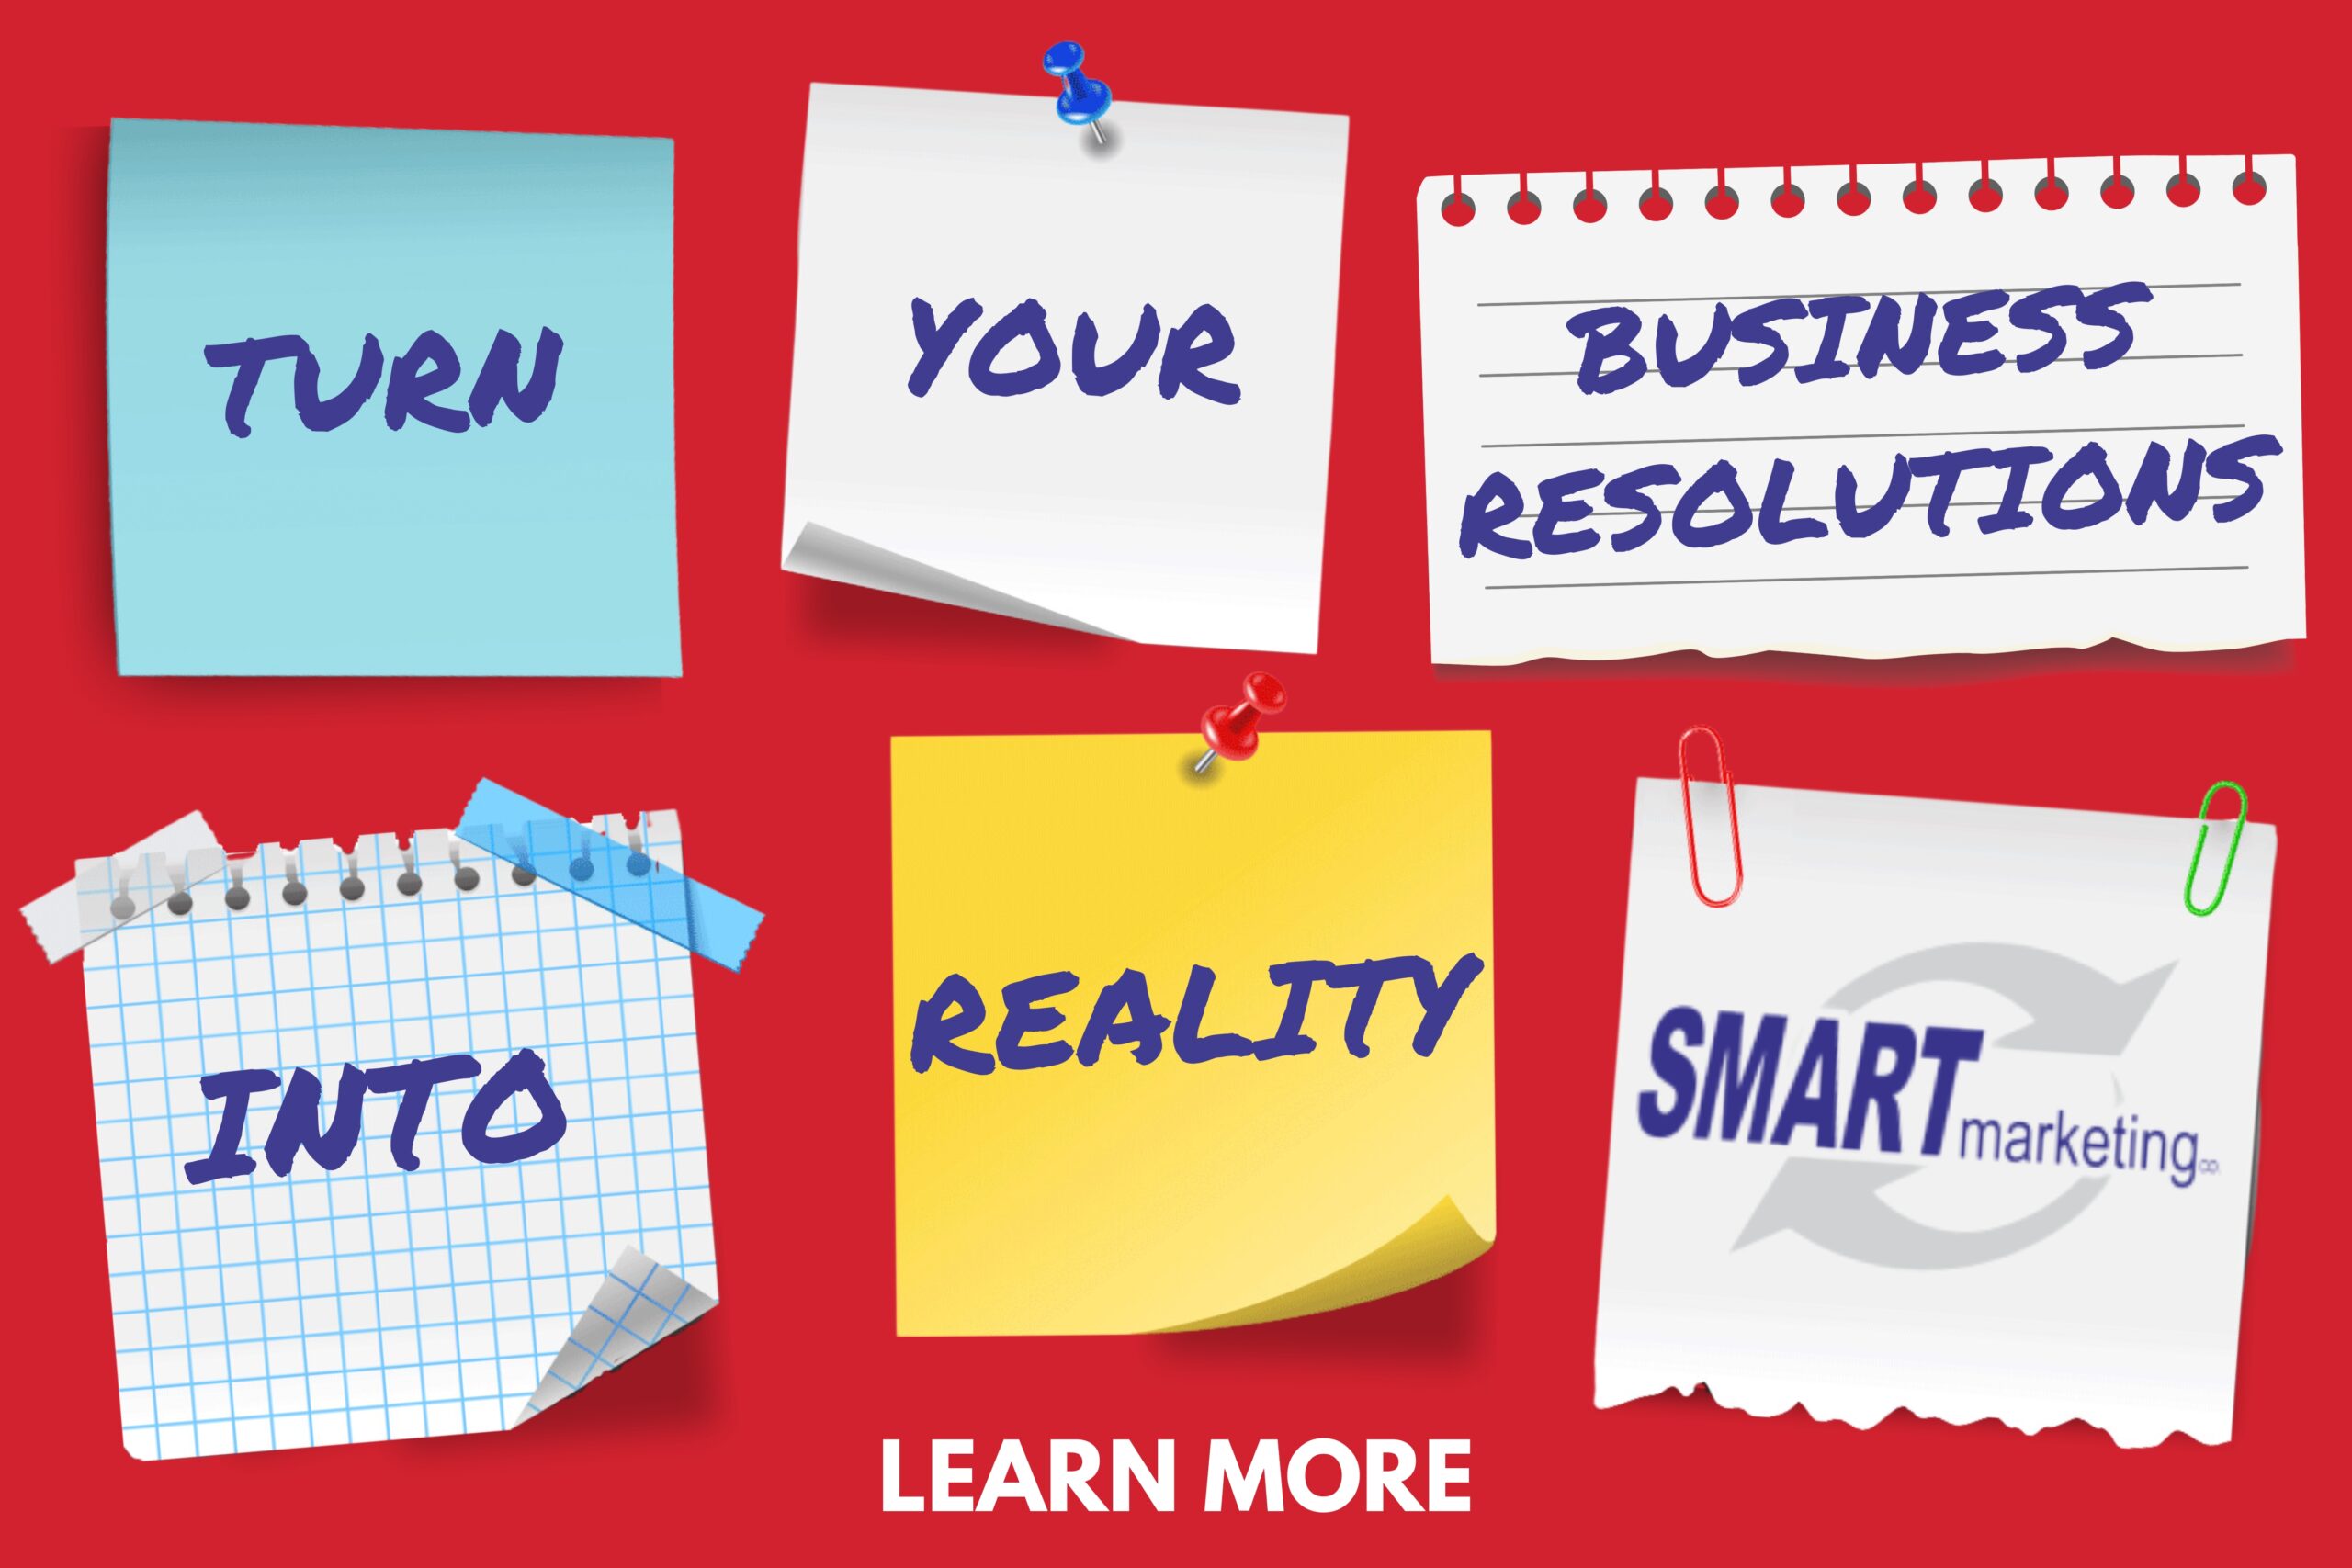 Let us make your business resolutions into reality!